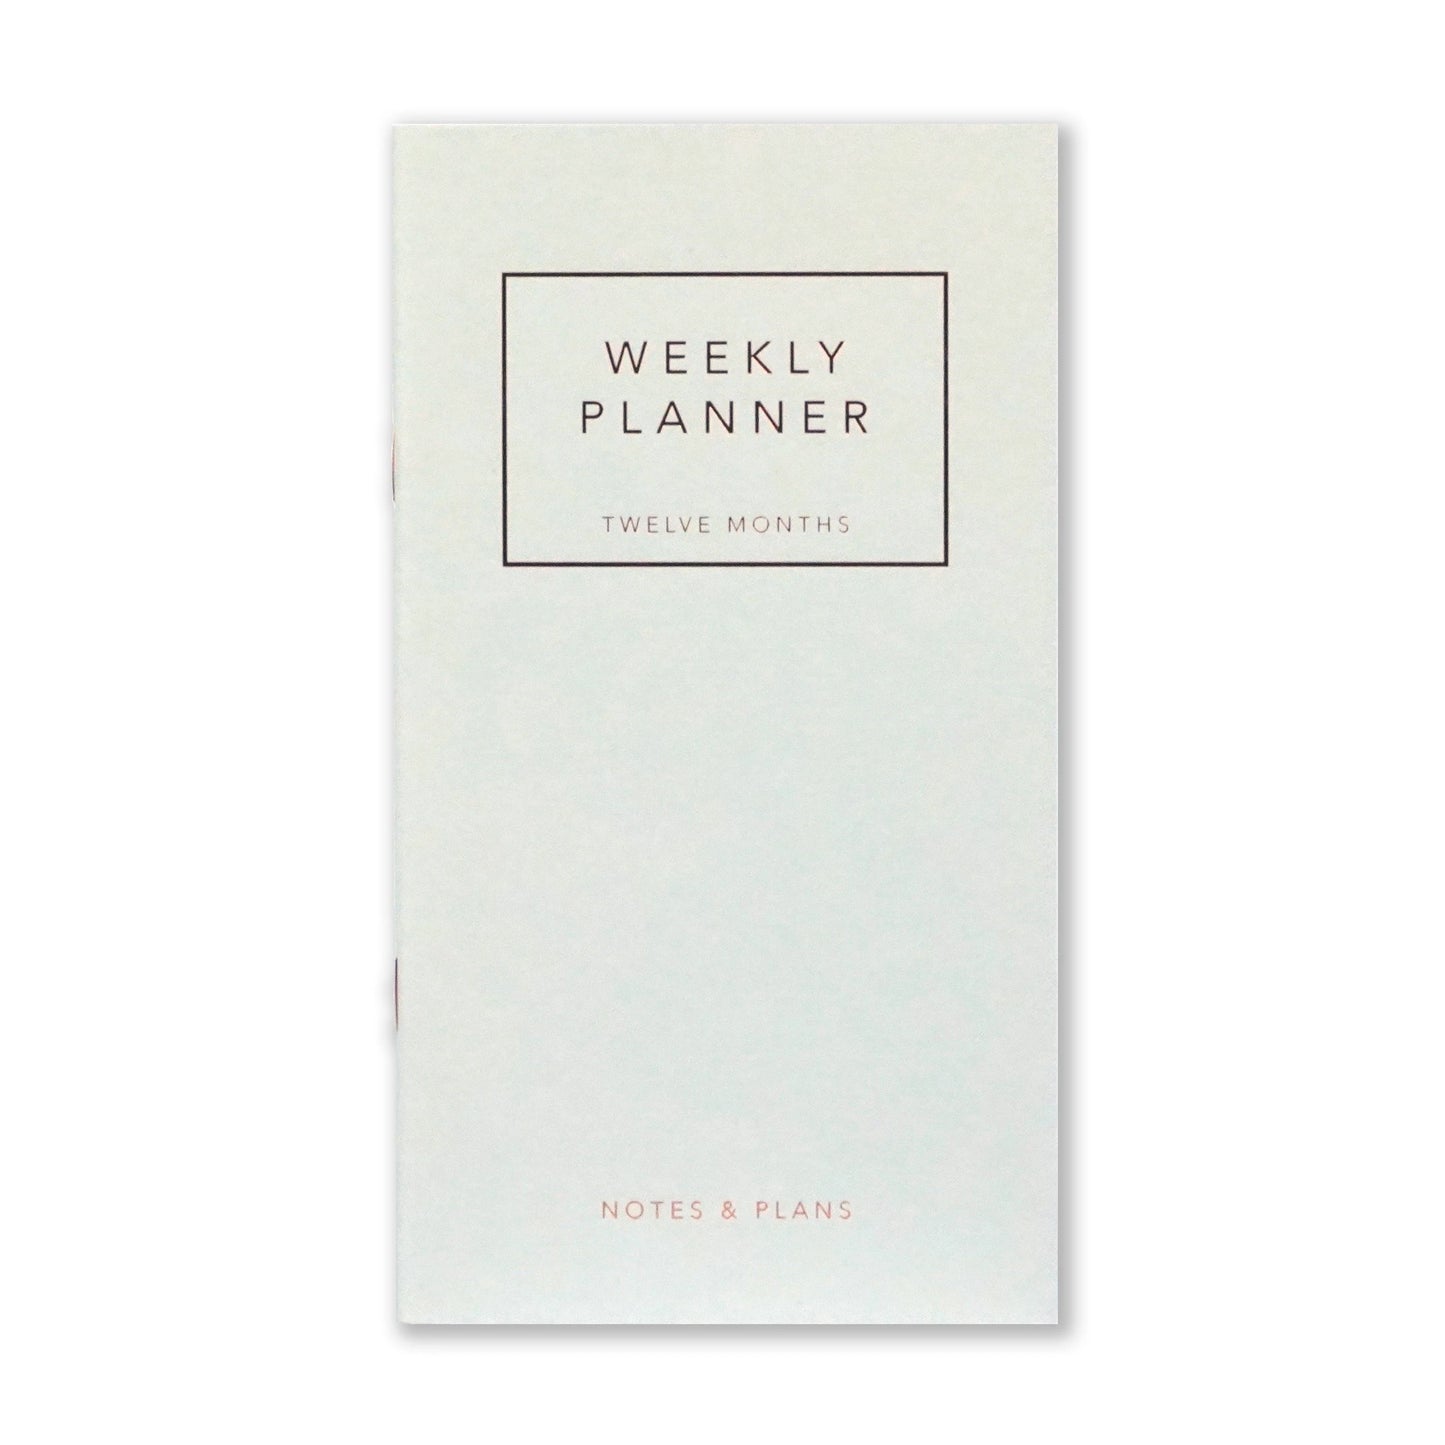 Weekly Planner by Leo La Douce